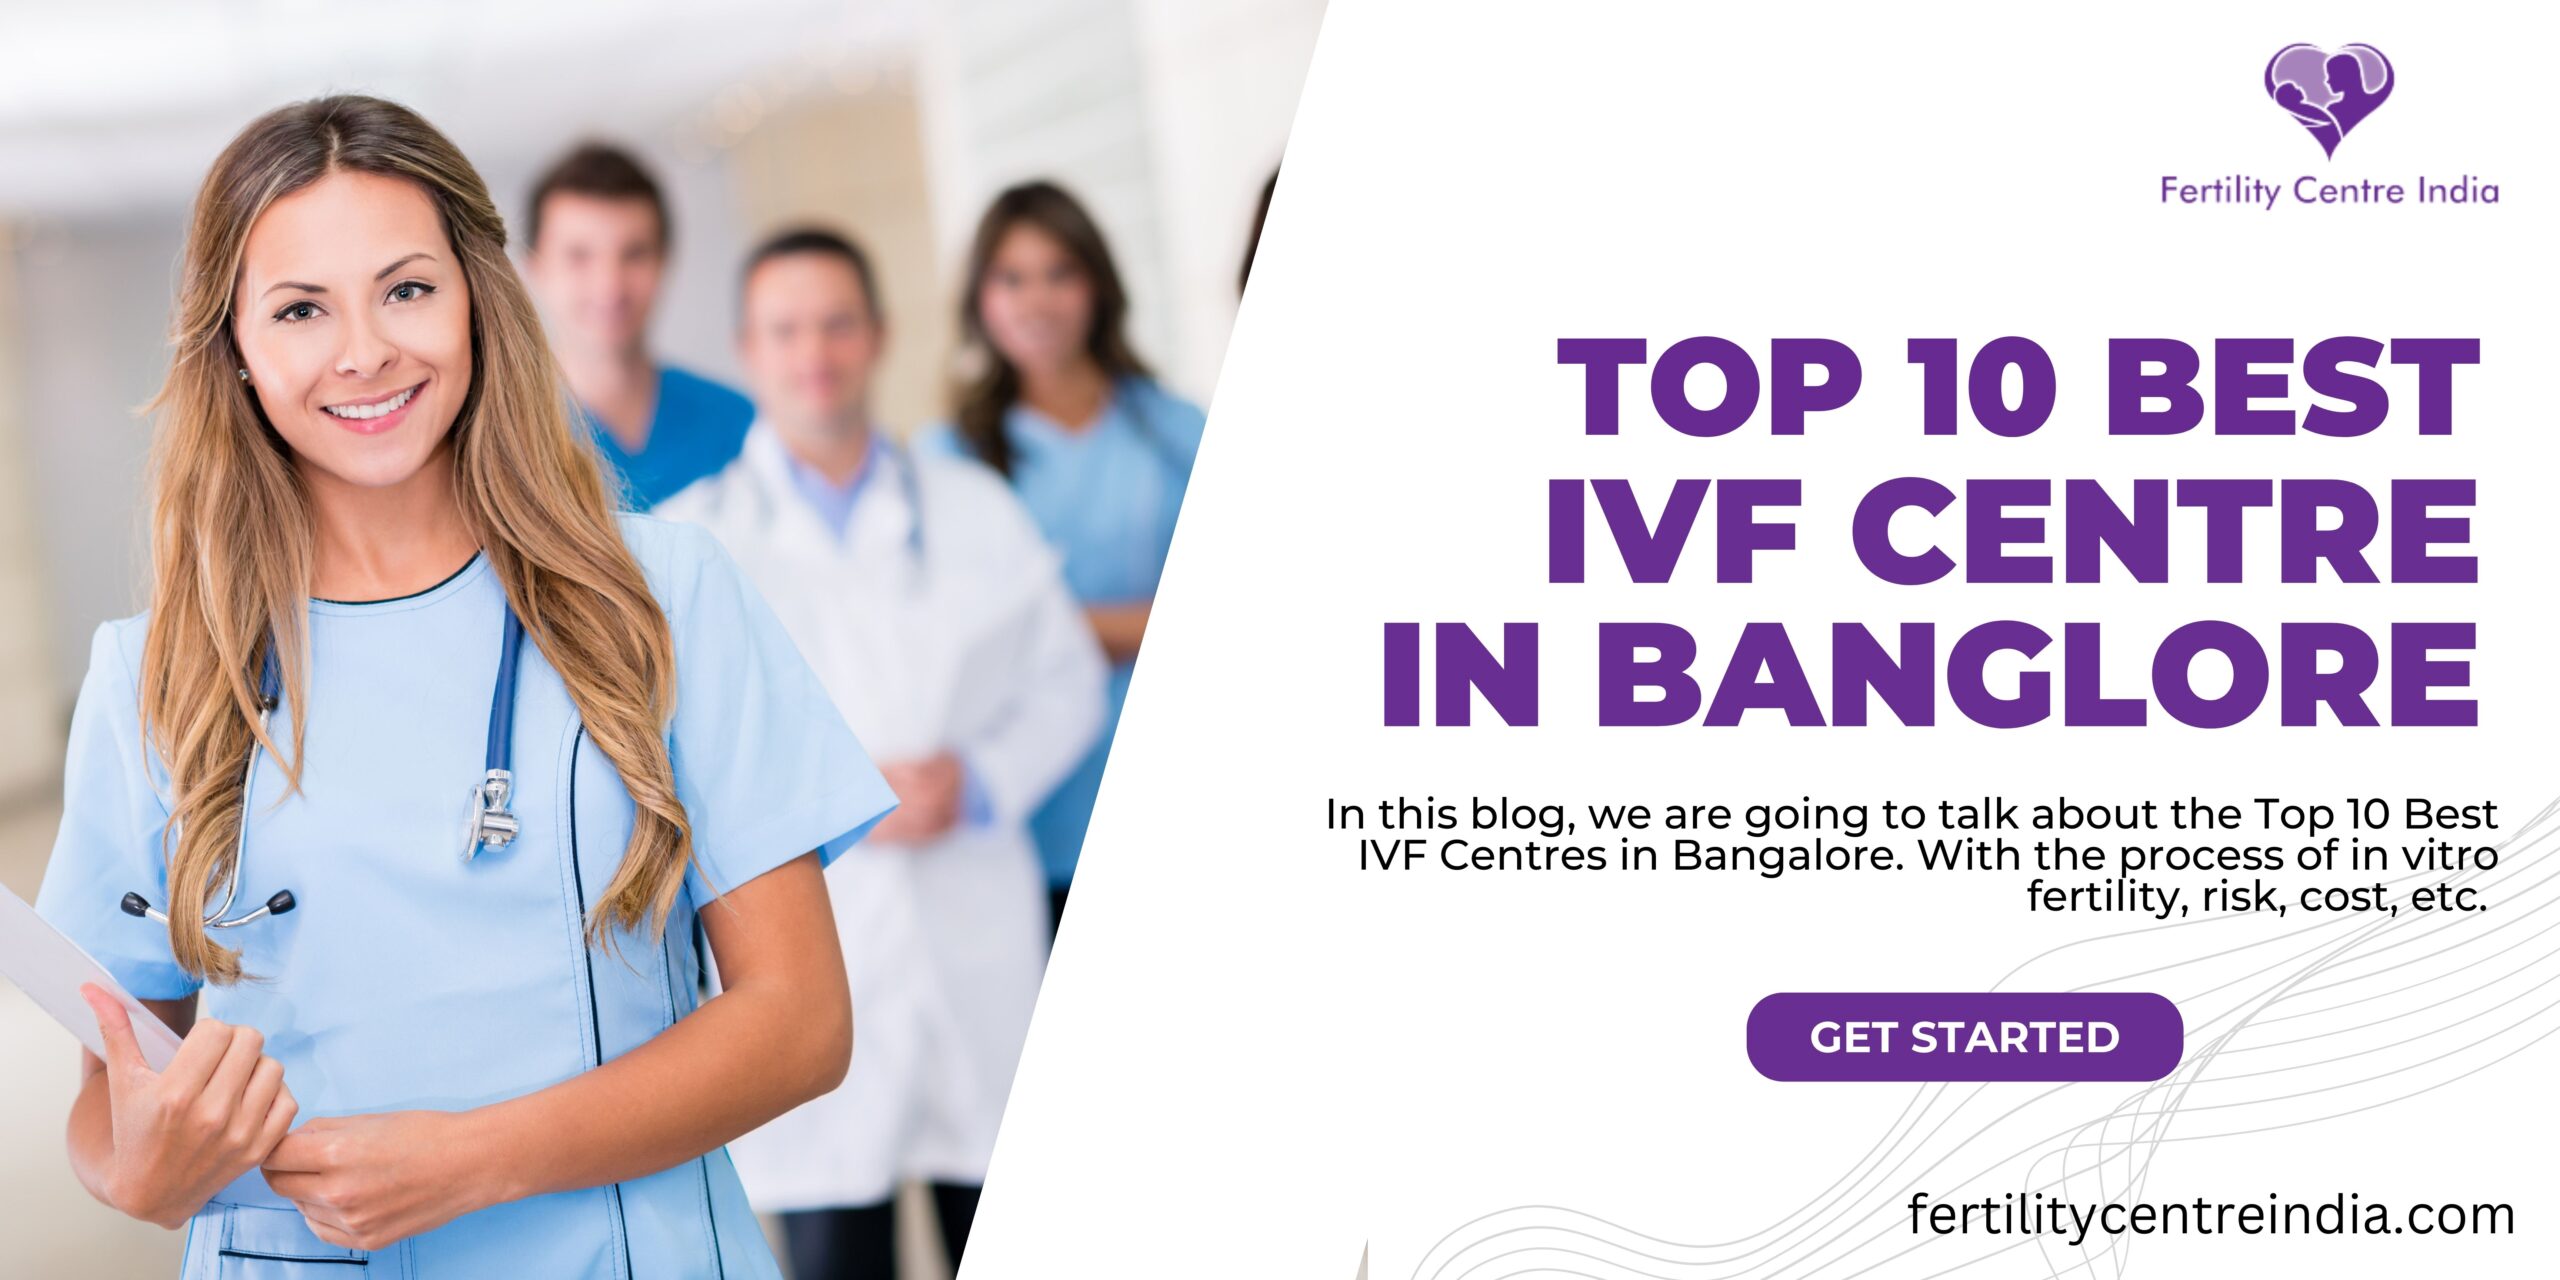 TOP 10 BEST IVF CENTRE IN BANGLORE